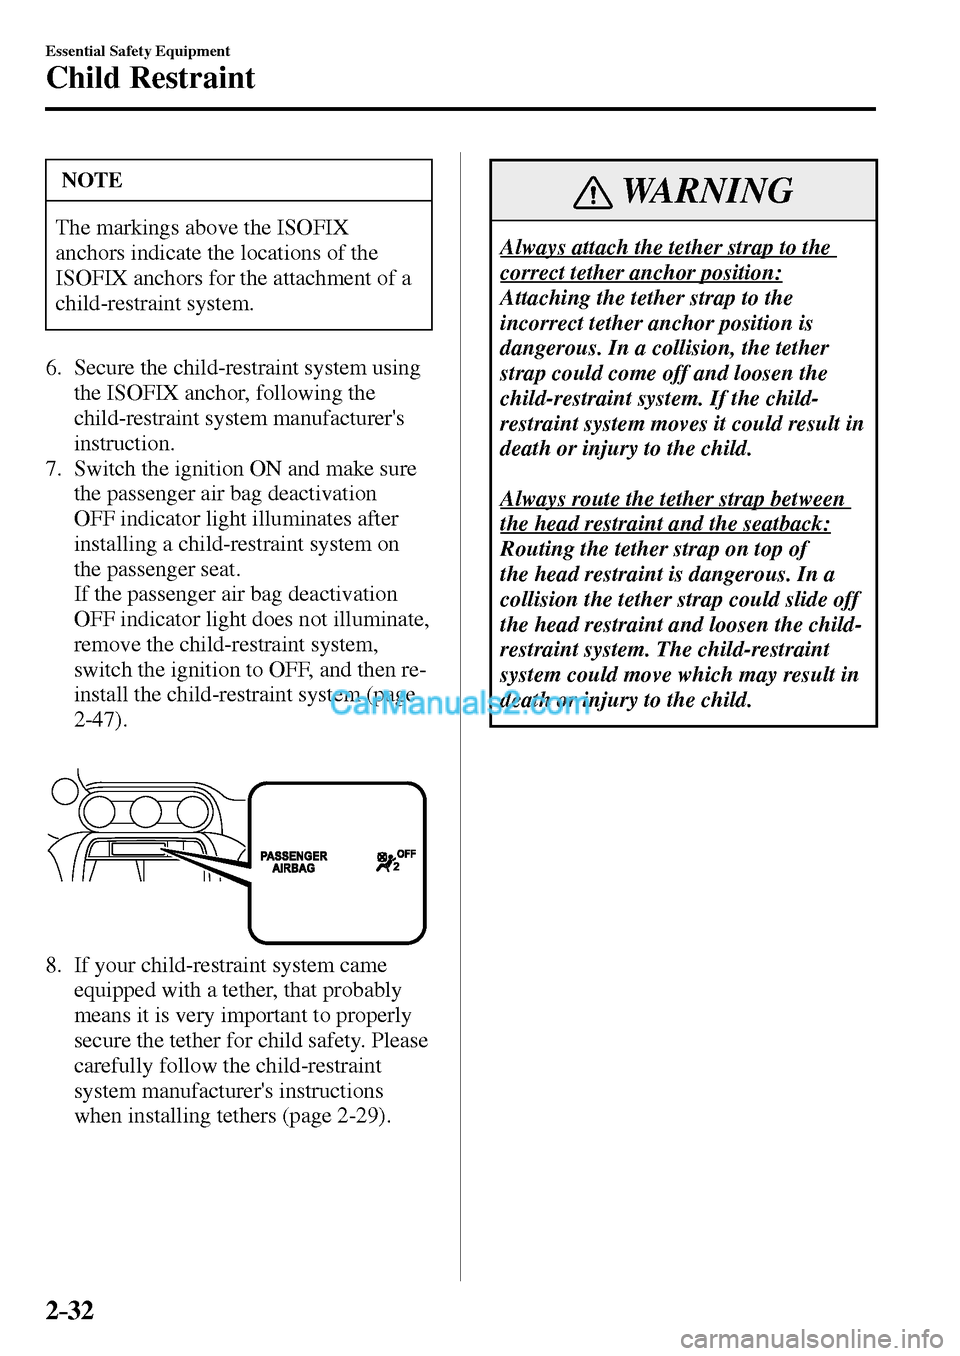 MAZDA MODEL MX-5 2017  Owners Manual - RHD (UK, Australia) (in English) 2–32
Essential Safety Equipment
Child Restraint
 NOTE
 The markings above the ISOFIX 
anchors indicate the locations of the 
ISOFIX anchors for the attachment of a 
child-restraint system. 
6   .   